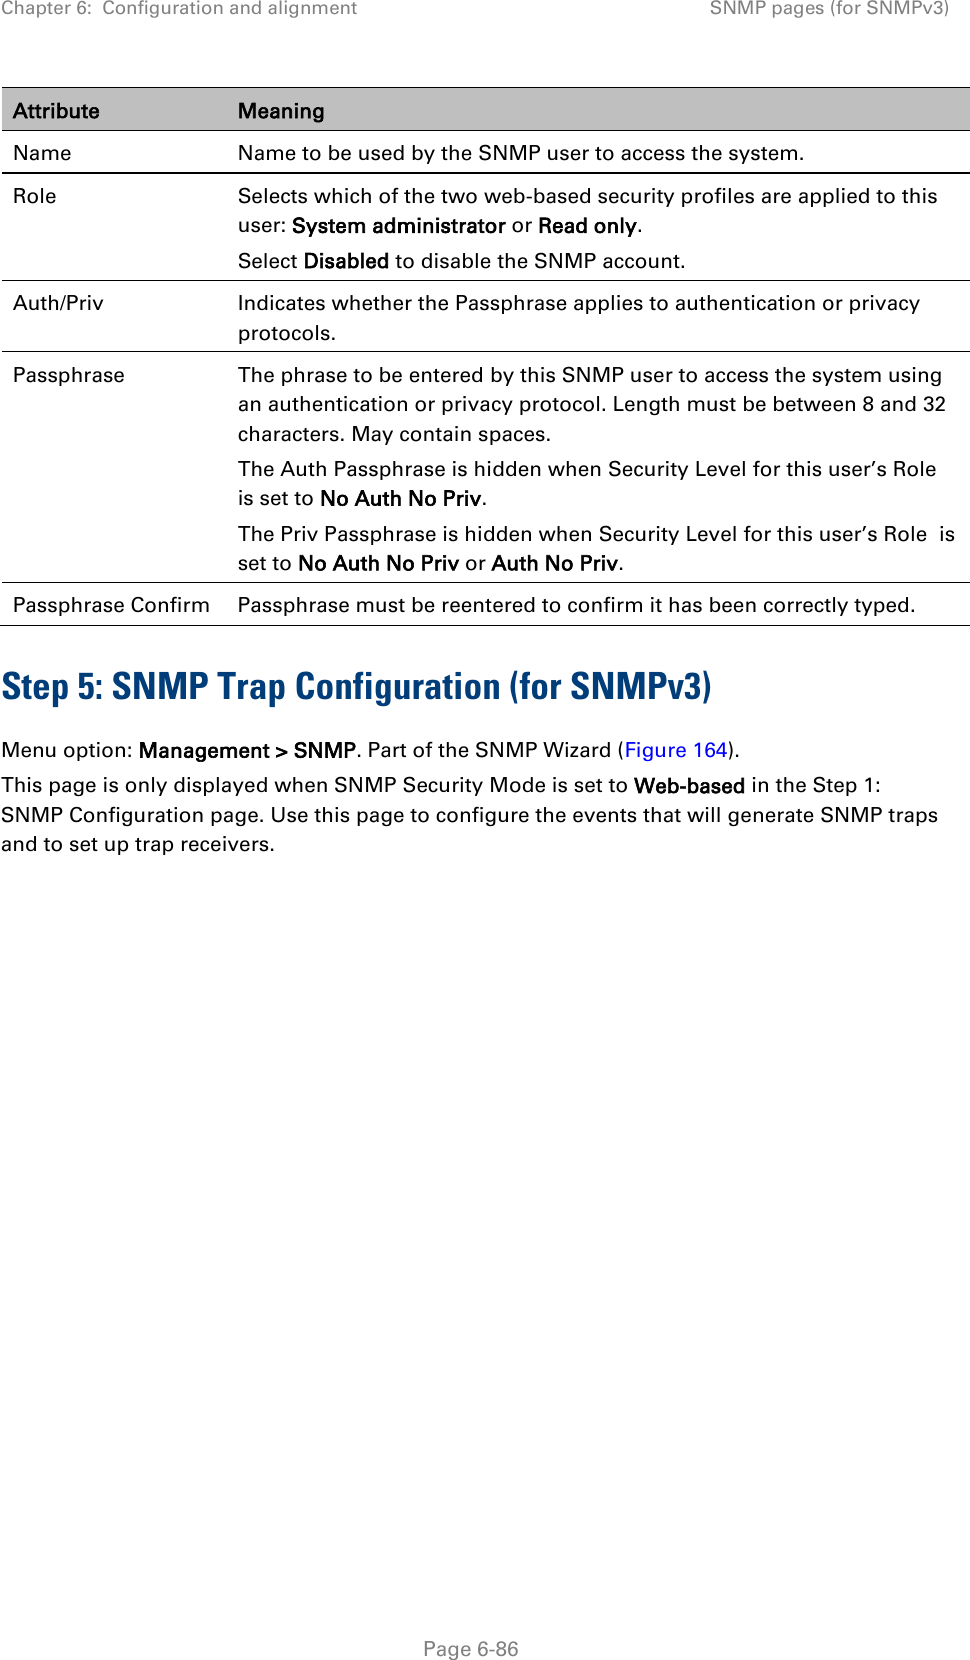 Chapter 6:  Configuration and alignment SNMP pages (for SNMPv3)  Attribute Meaning Name Name to be used by the SNMP user to access the system. Role Selects which of the two web-based security profiles are applied to this user: System administrator or Read only. Select Disabled to disable the SNMP account. Auth/Priv Indicates whether the Passphrase applies to authentication or privacy protocols. Passphrase The phrase to be entered by this SNMP user to access the system using an authentication or privacy protocol. Length must be between 8 and 32 characters. May contain spaces. The Auth Passphrase is hidden when Security Level for this user’s Role  is set to No Auth No Priv. The Priv Passphrase is hidden when Security Level for this user’s Role  is set to No Auth No Priv or Auth No Priv. Passphrase Confirm Passphrase must be reentered to confirm it has been correctly typed. Step 5: SNMP Trap Configuration (for SNMPv3) Menu option: Management &gt; SNMP. Part of the SNMP Wizard (Figure 164). This page is only displayed when SNMP Security Mode is set to Web-based in the Step 1: SNMP Configuration page. Use this page to configure the events that will generate SNMP traps and to set up trap receivers.  Page 6-86 